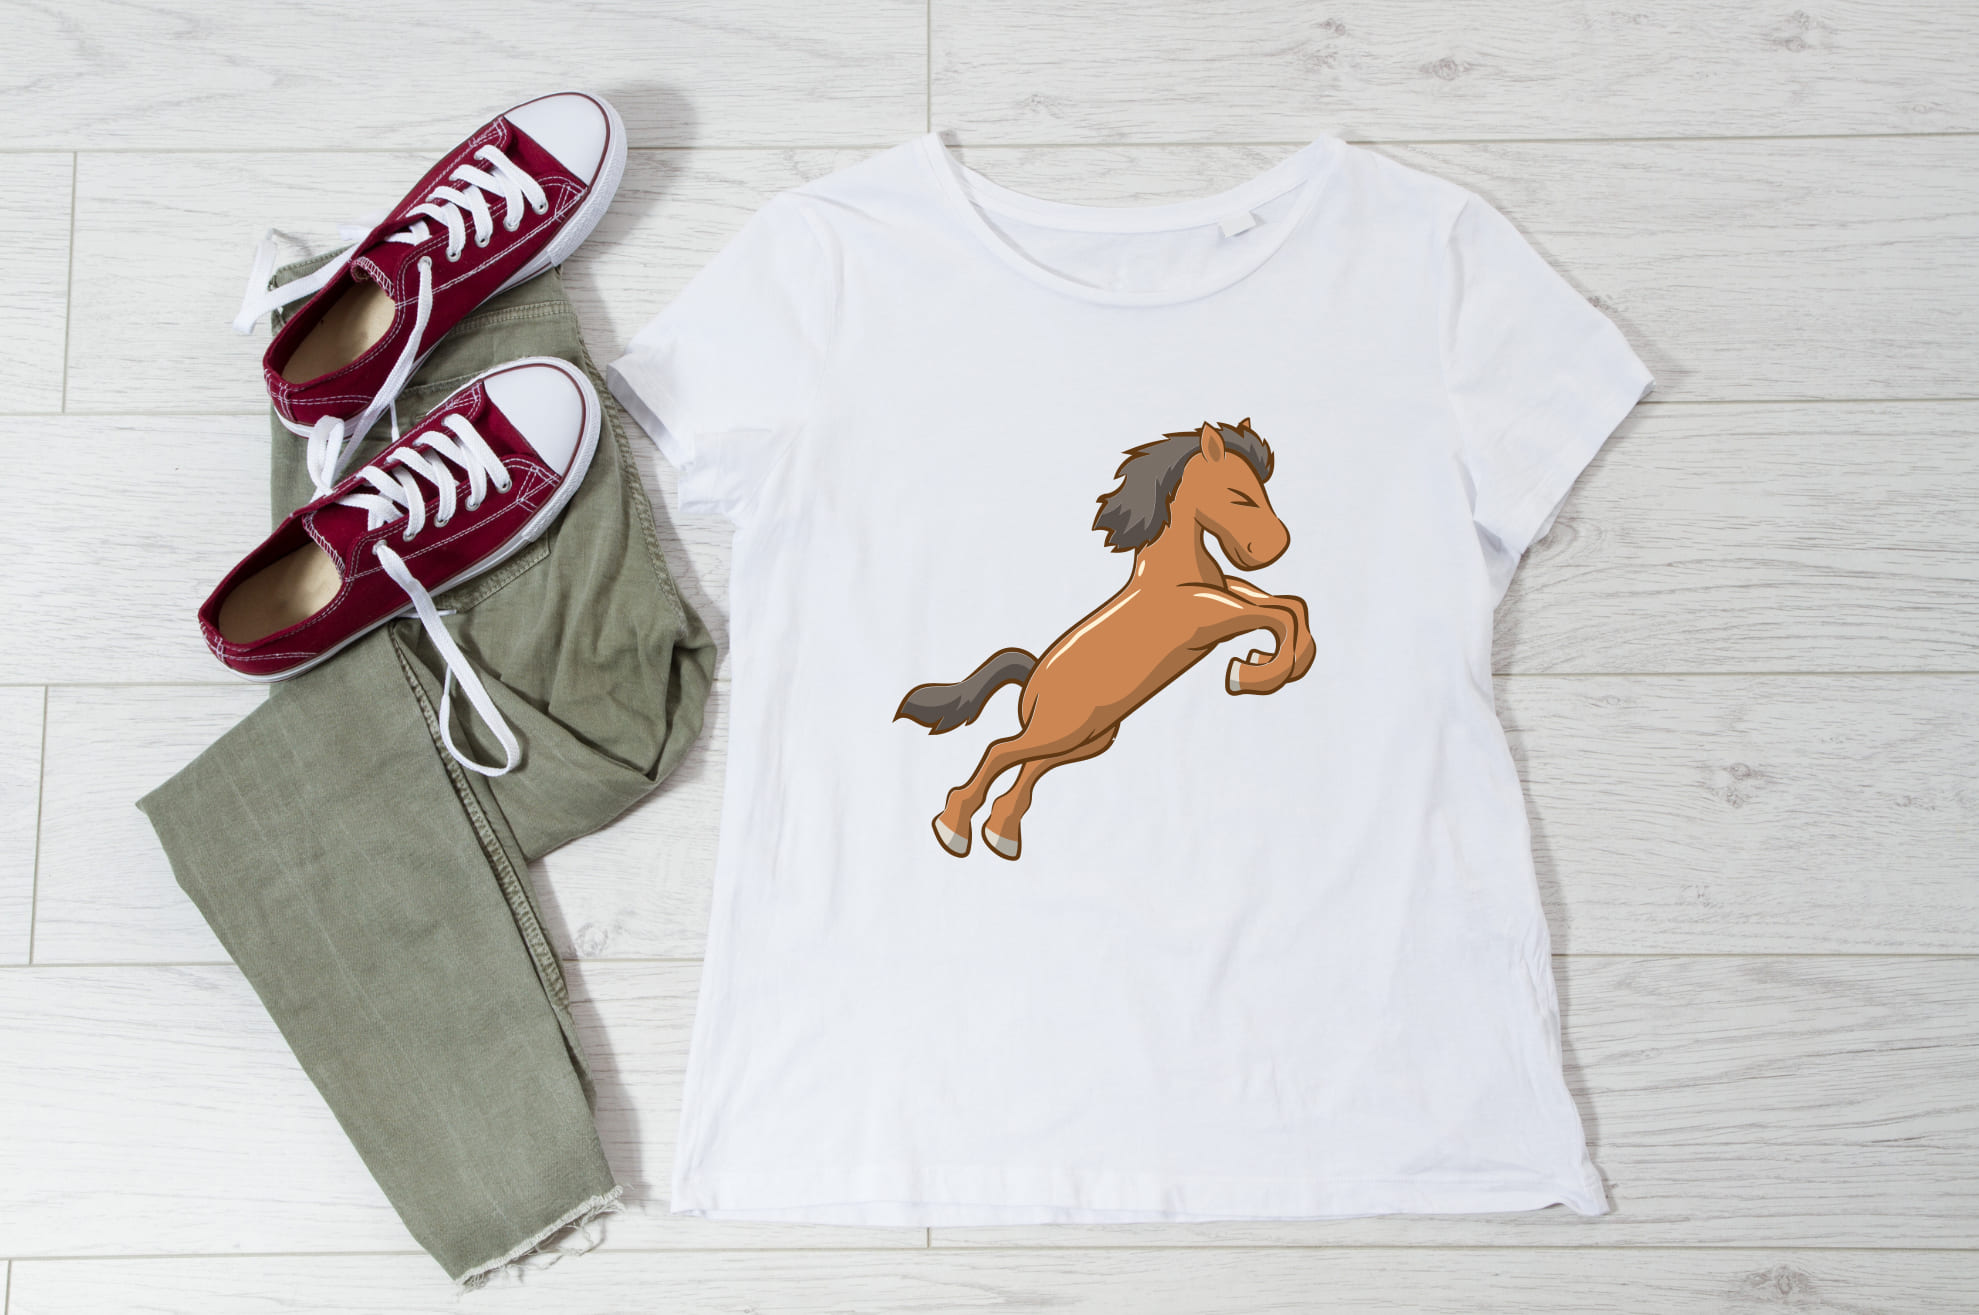 White t-shirt with an image of a baby horse, and sneakers with trousers on the wooden background.